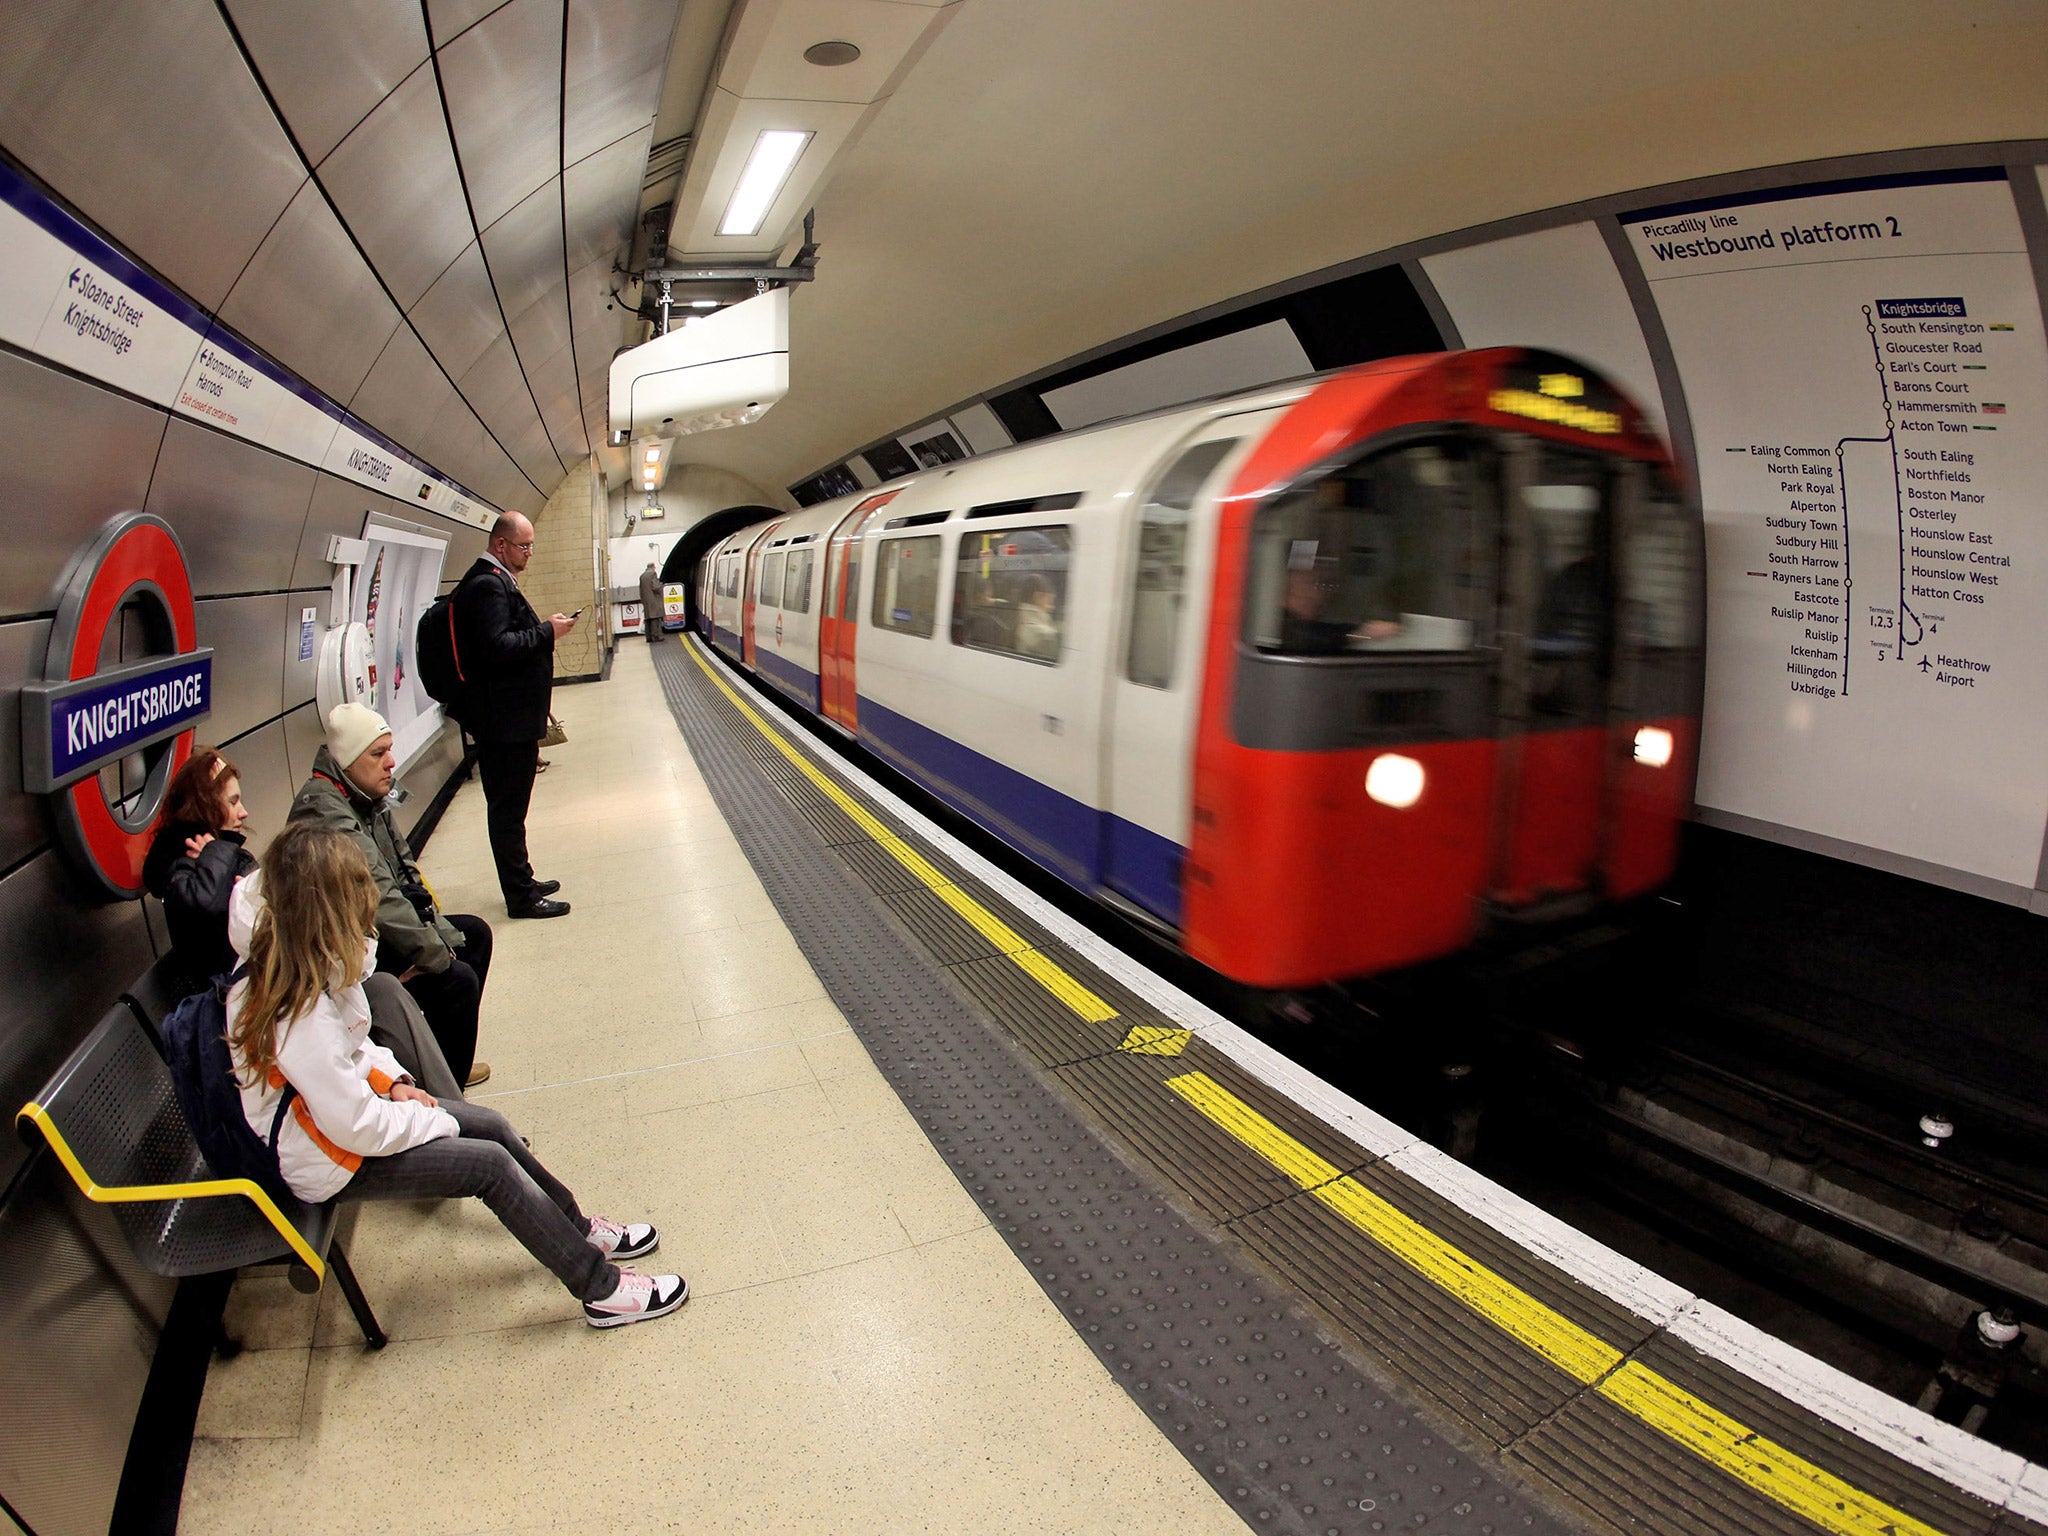 The Piccadilly Line includes a stop at Heathrow airport